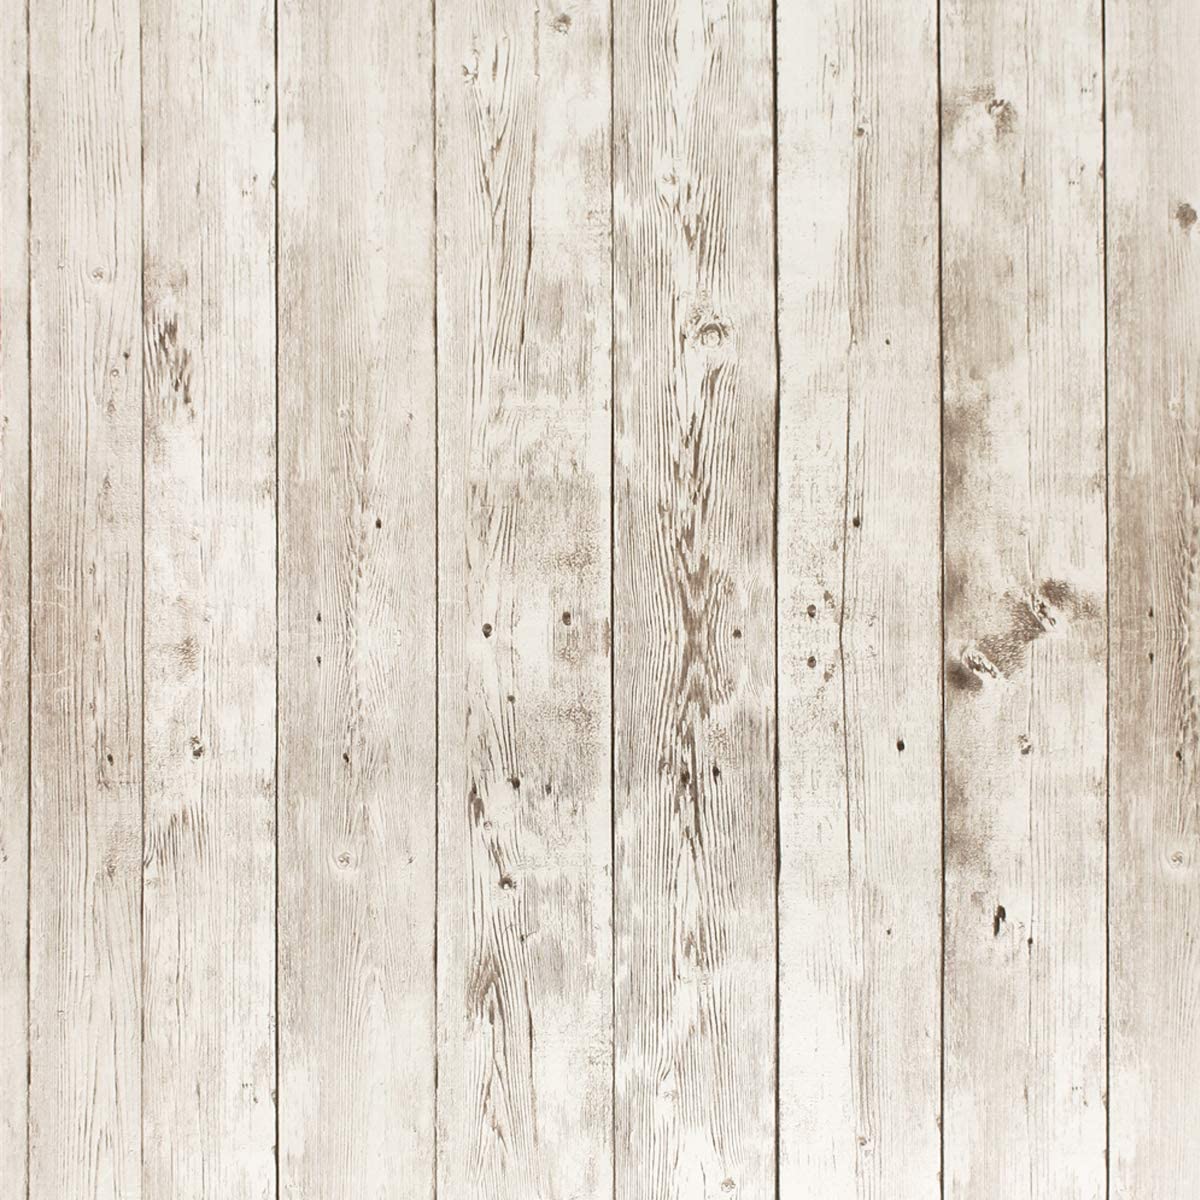 MulYeeh 17.7'' X 118'' Peel And Stick Wallpaper Wood Plank Faux Wood Wallpaper Removable Self Adhesive Vintage Wall Covering Prepasted Decorative